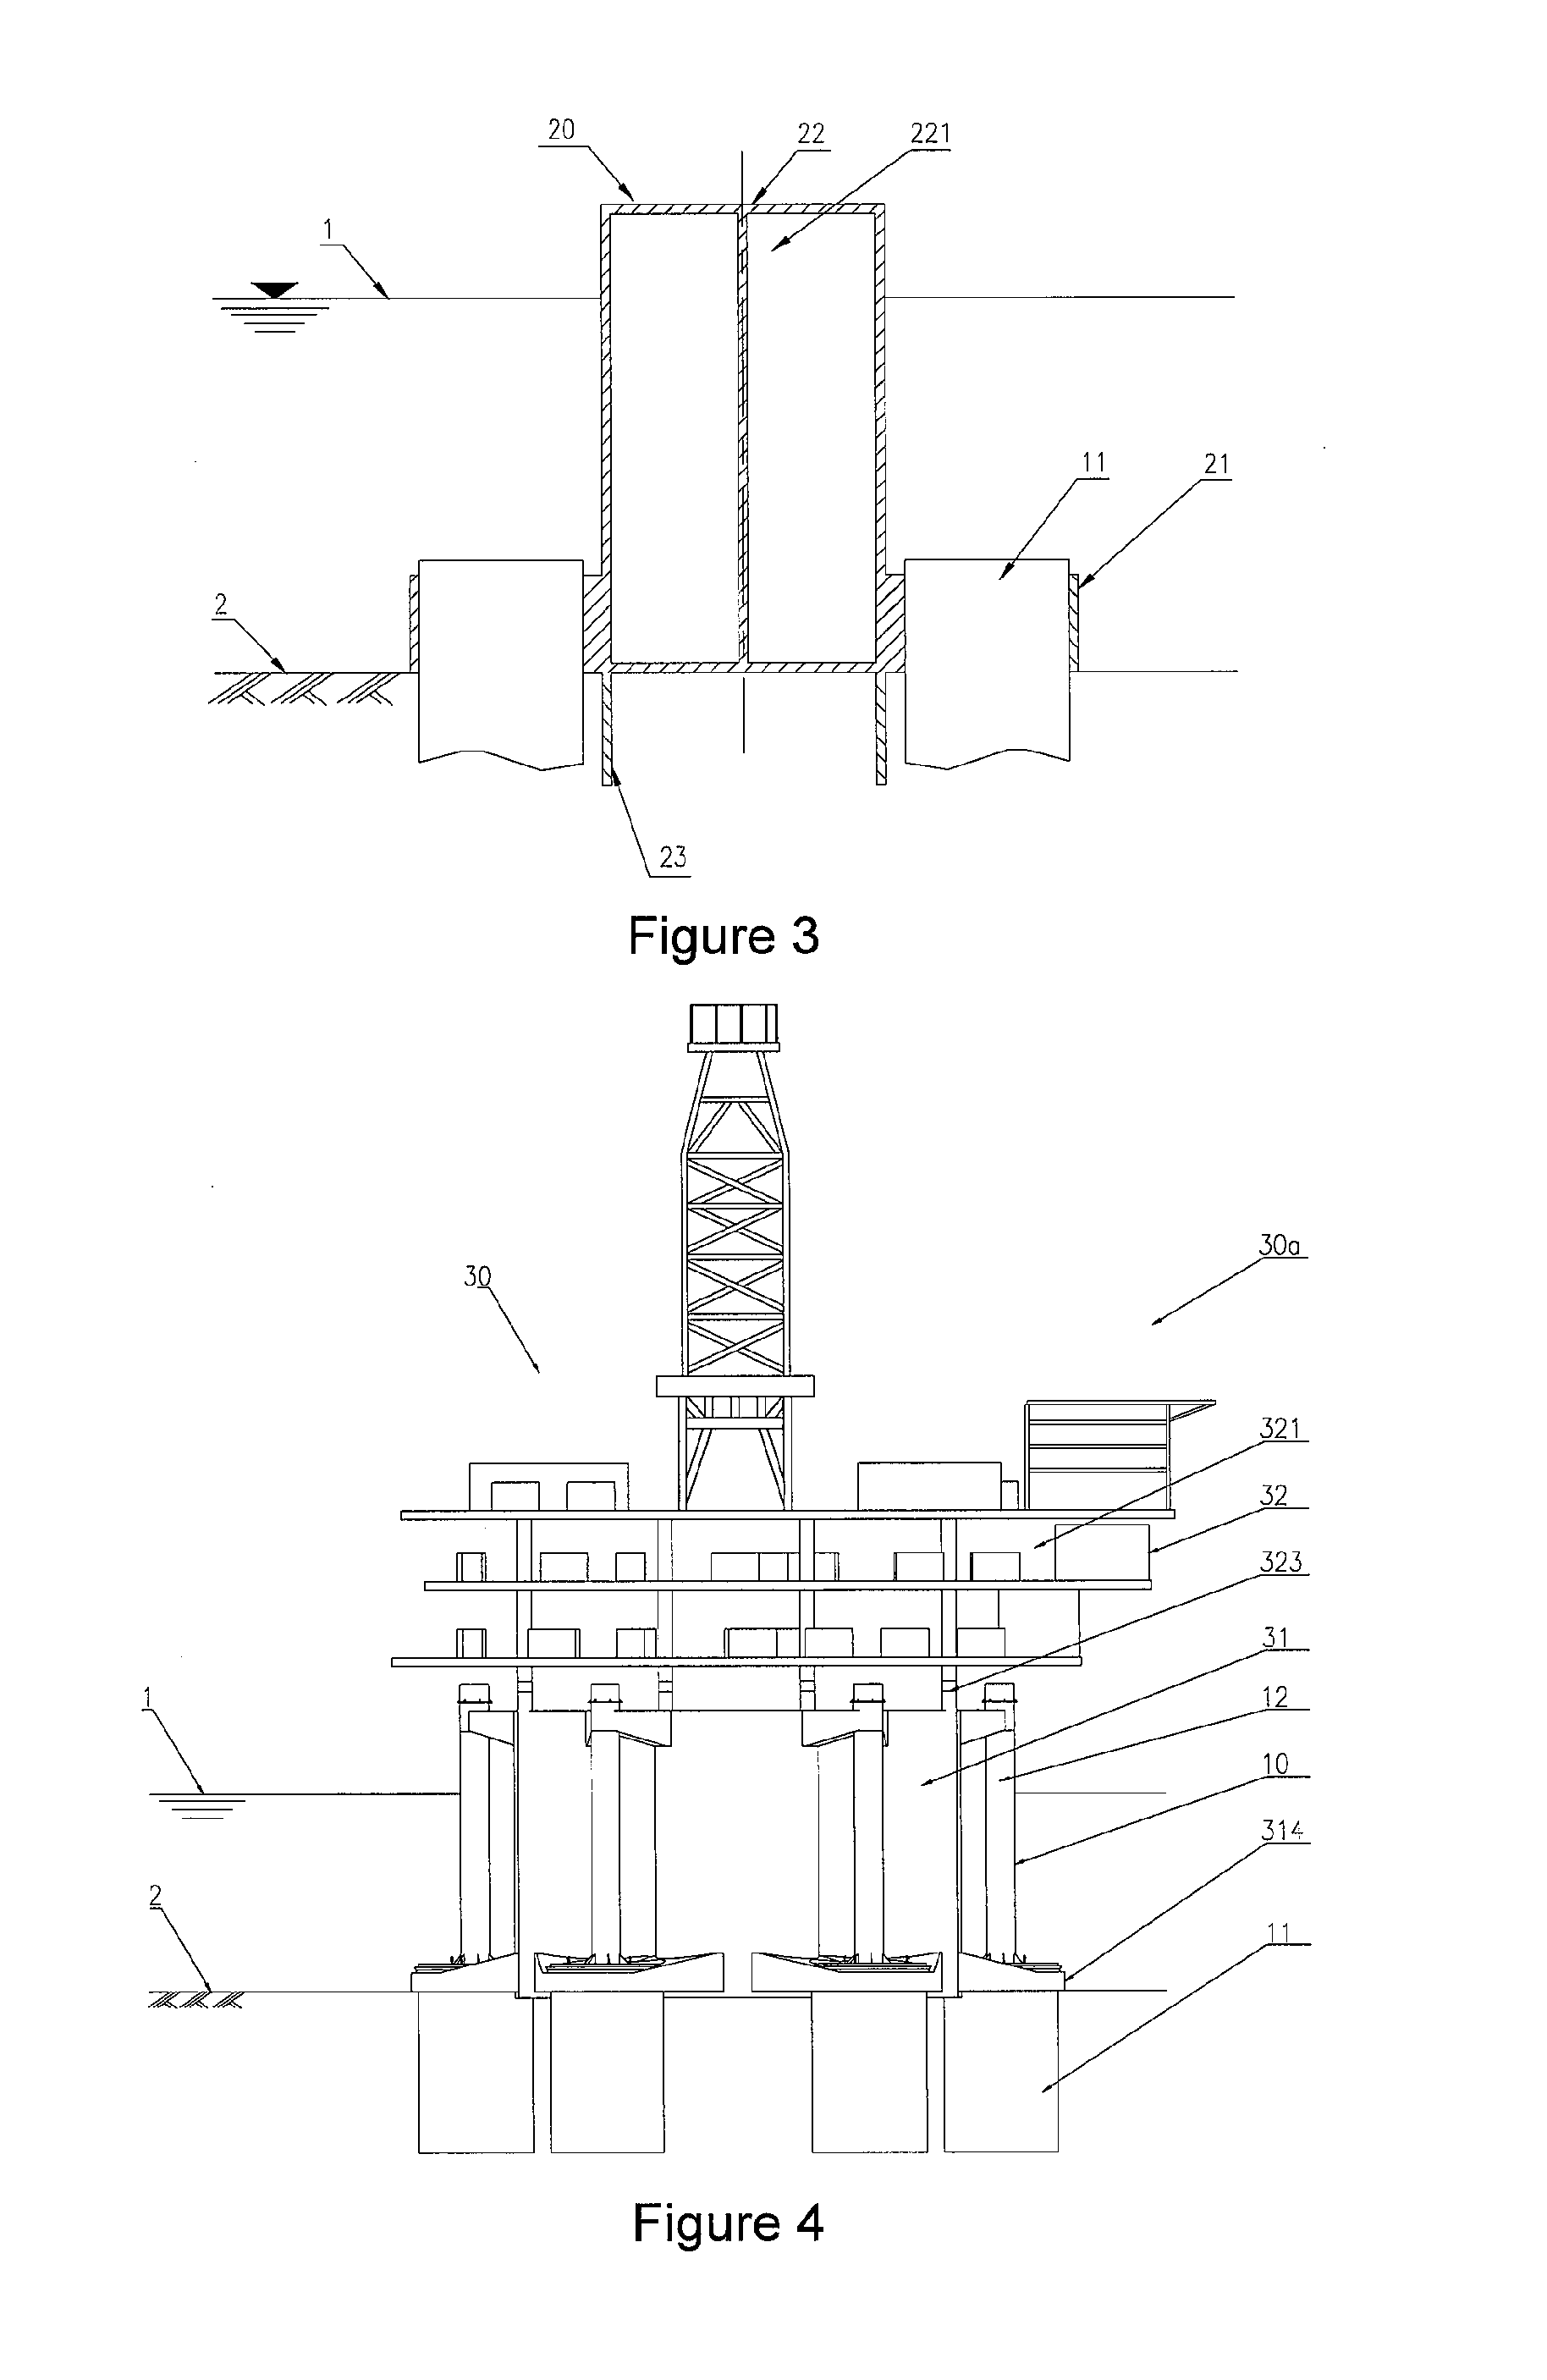 Type of suction leg, an offshore caisson, and a sit-on-bottom offshore platform